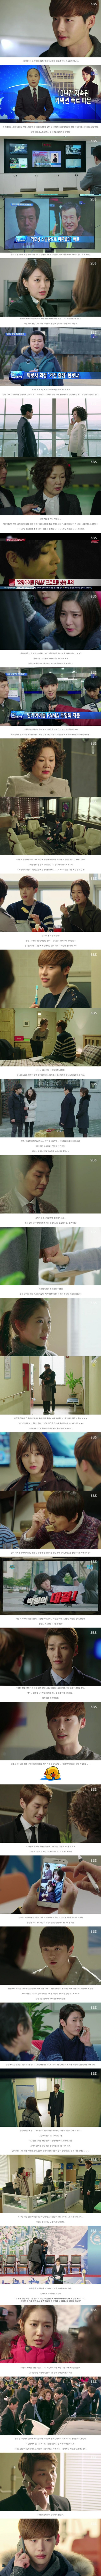 final episodes 19 and 20 captures for the Korean drama 'Pinocchio'